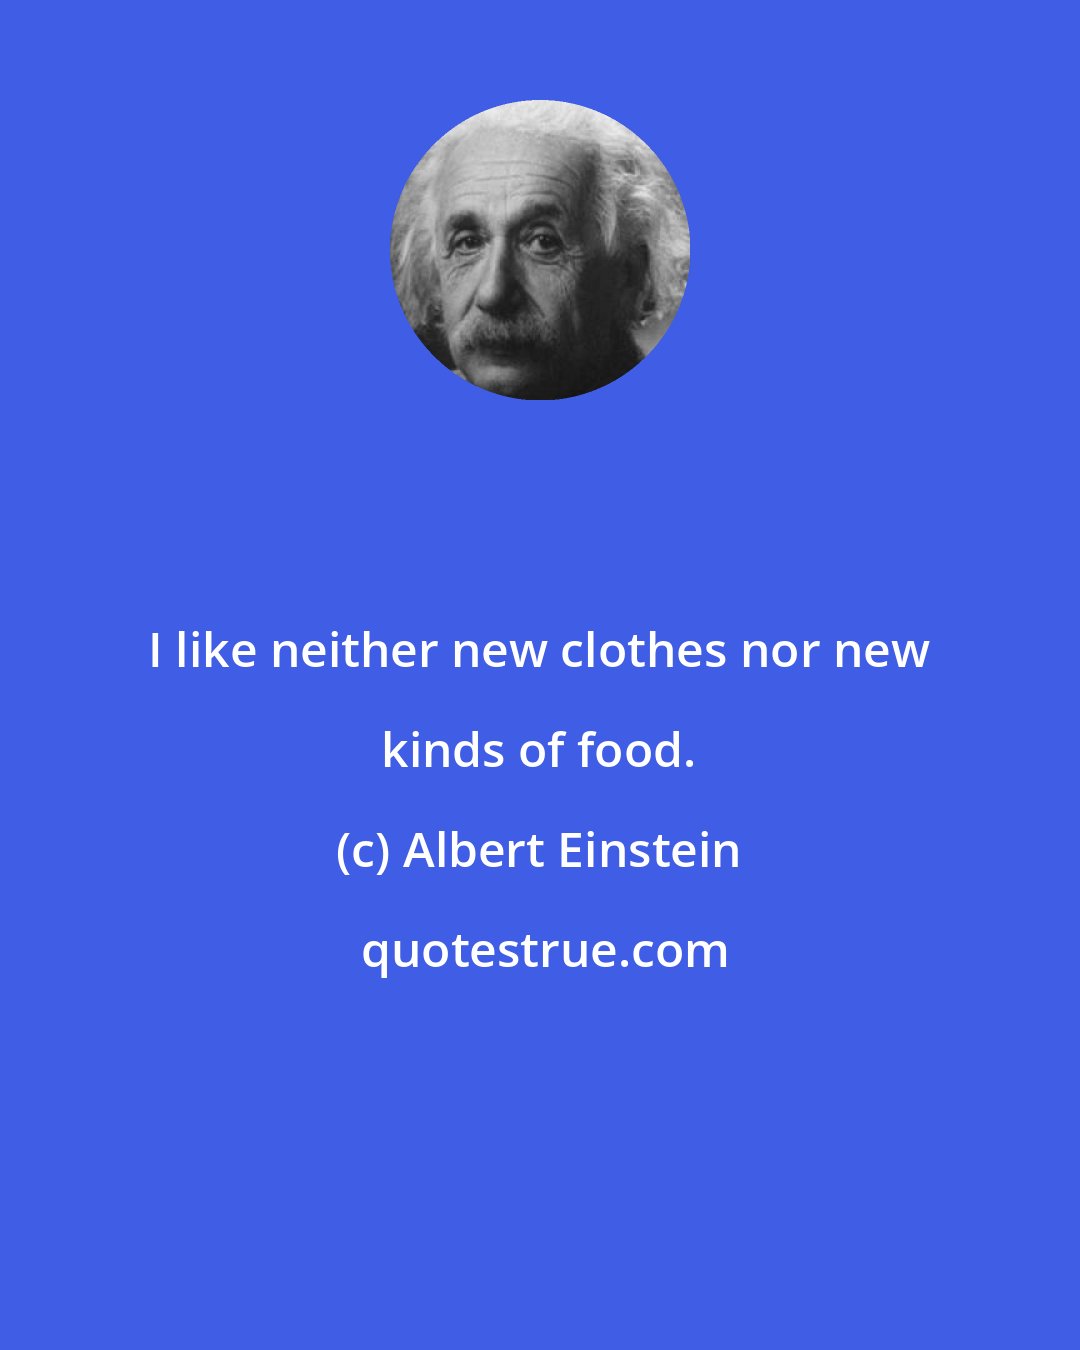 Albert Einstein: I like neither new clothes nor new kinds of food.